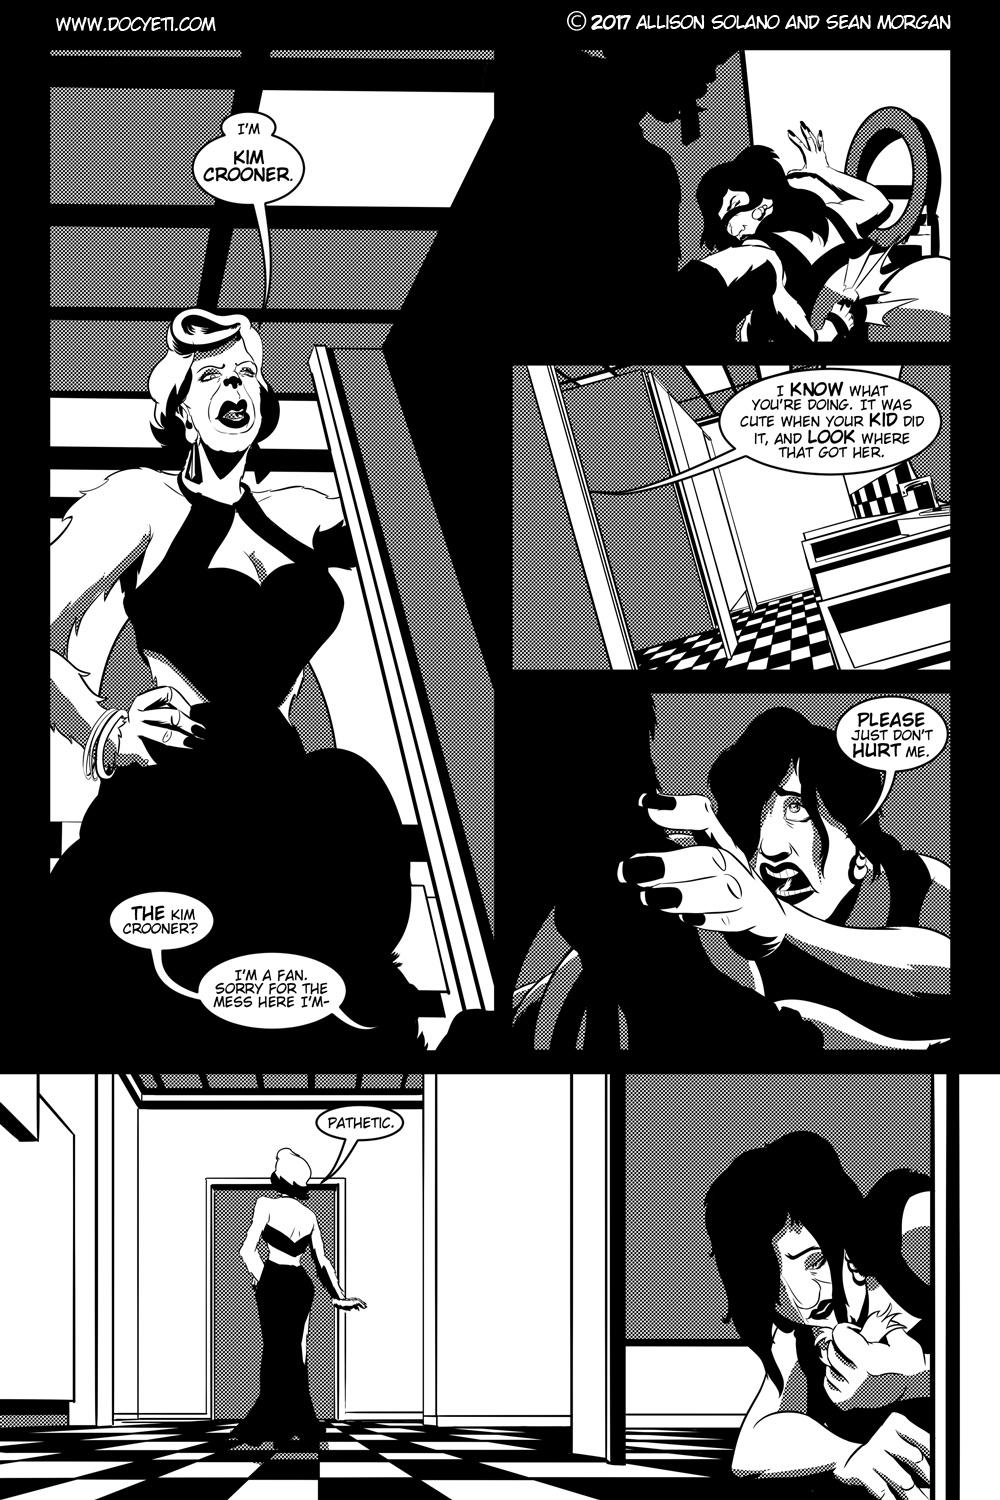 Flight of the Mothman! Issue 1 page 6